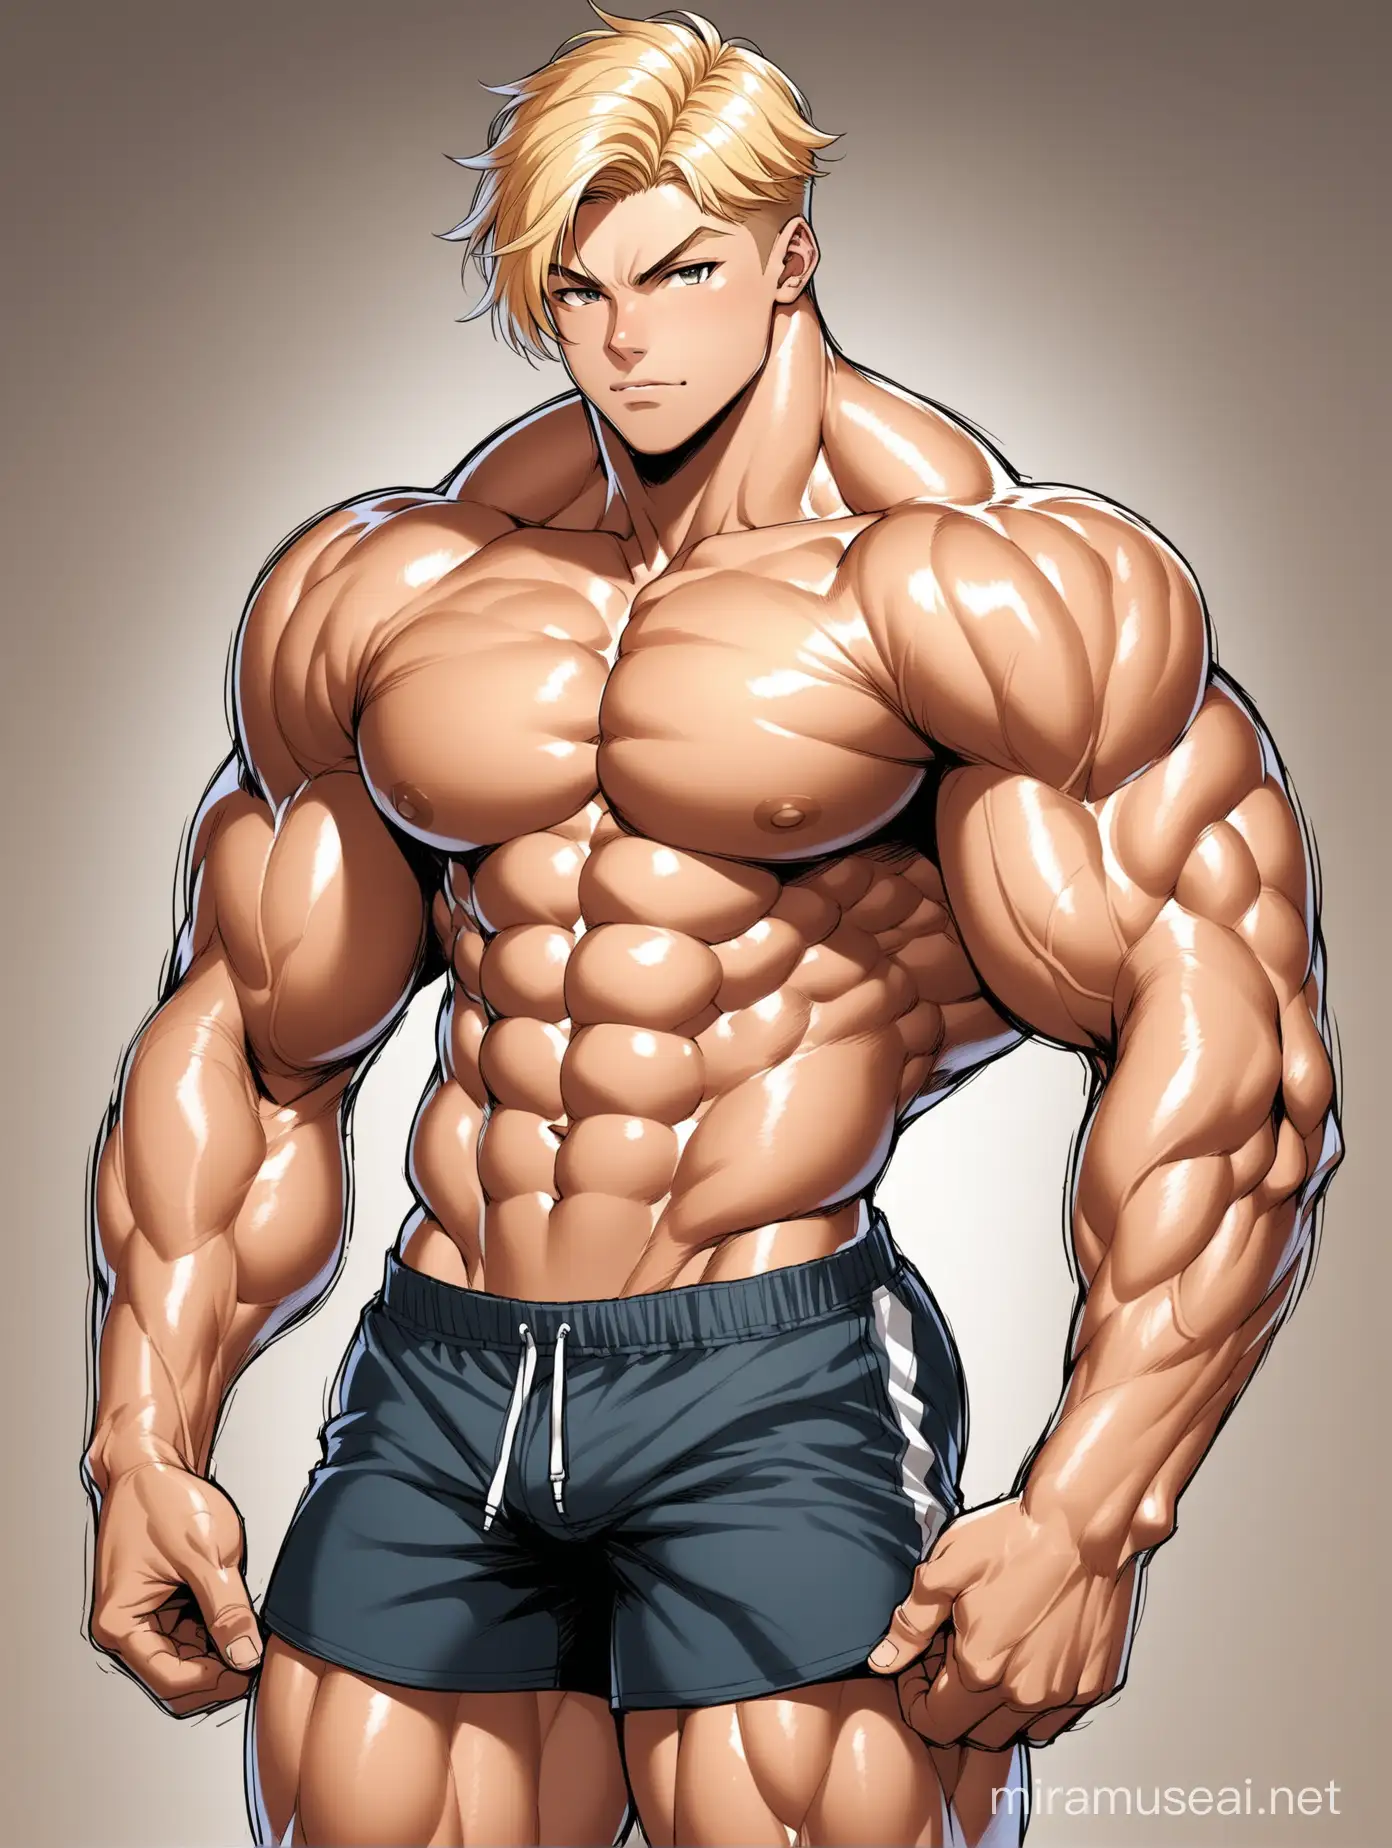 Full color drawing of an extremely muscular teenage male with short blond hair, a very beautiful, delicate face, wide shoulders, huge biceps, hard six-pack abs, and very strong and powerful legs, wearing shorts or trunks